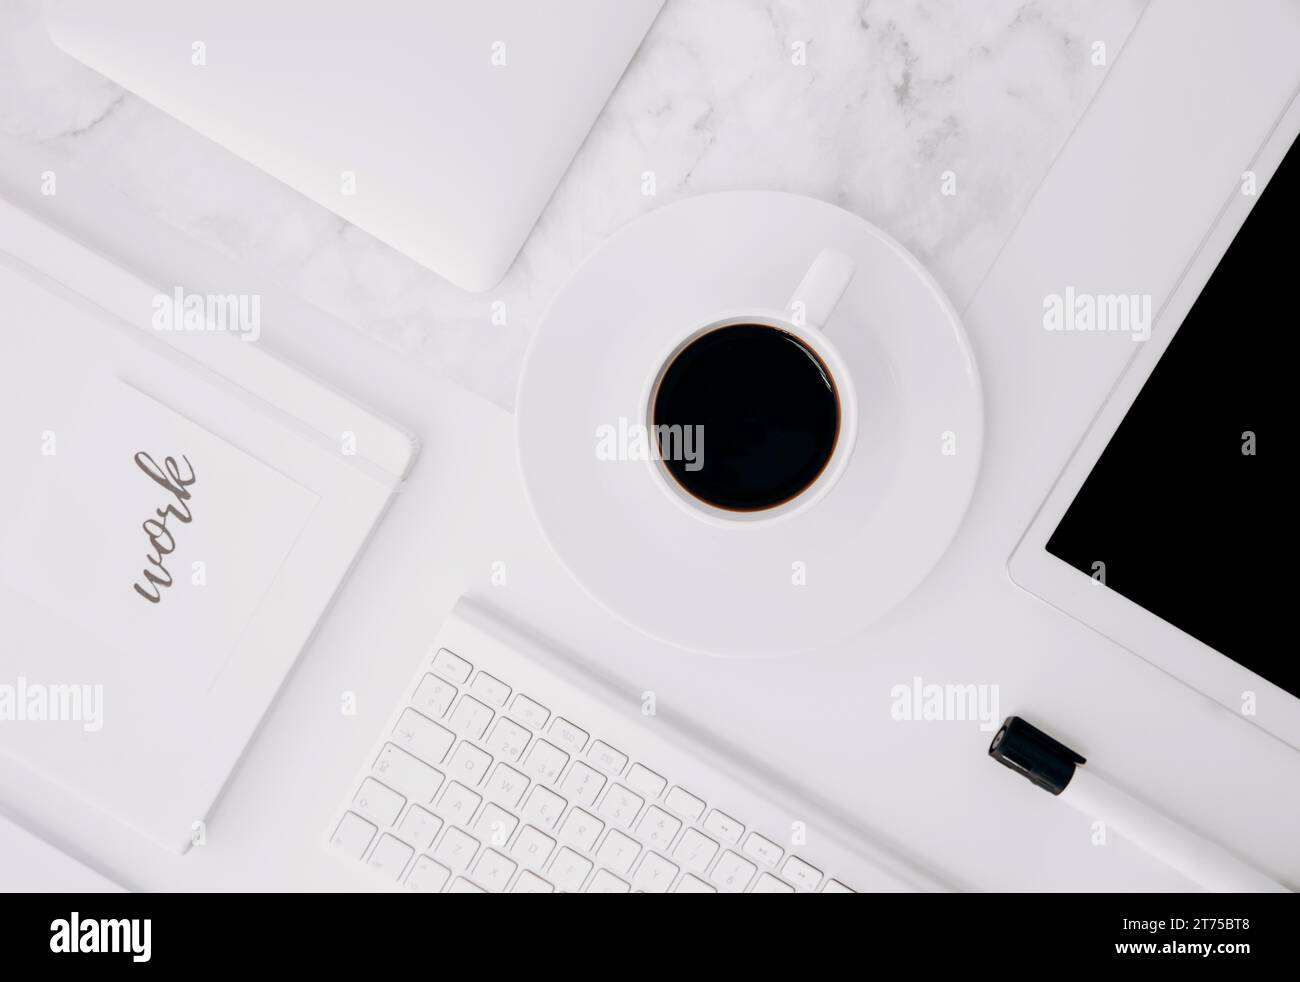 Work text diary digital tablet coffee cup keyboard black marker white desk Stock Photo